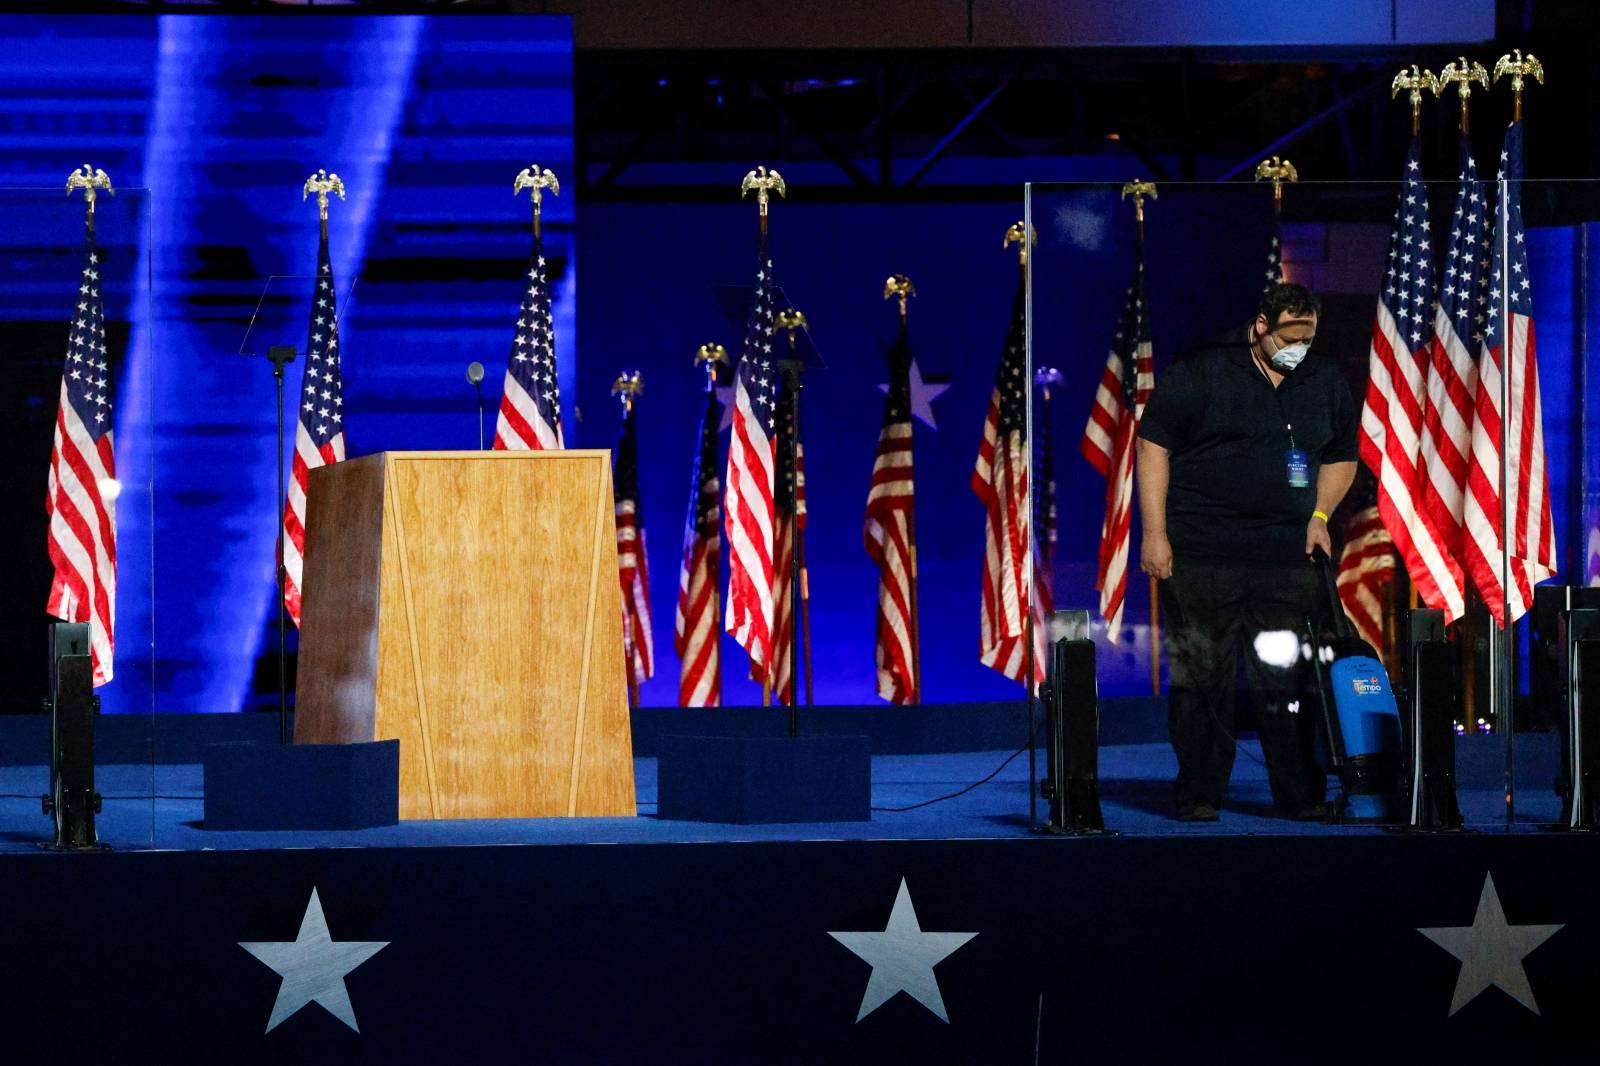 A worker vacuums the  stage area where  U.S. president-elect Joe Biden and will speak later this evening in Wilmington, Delaware